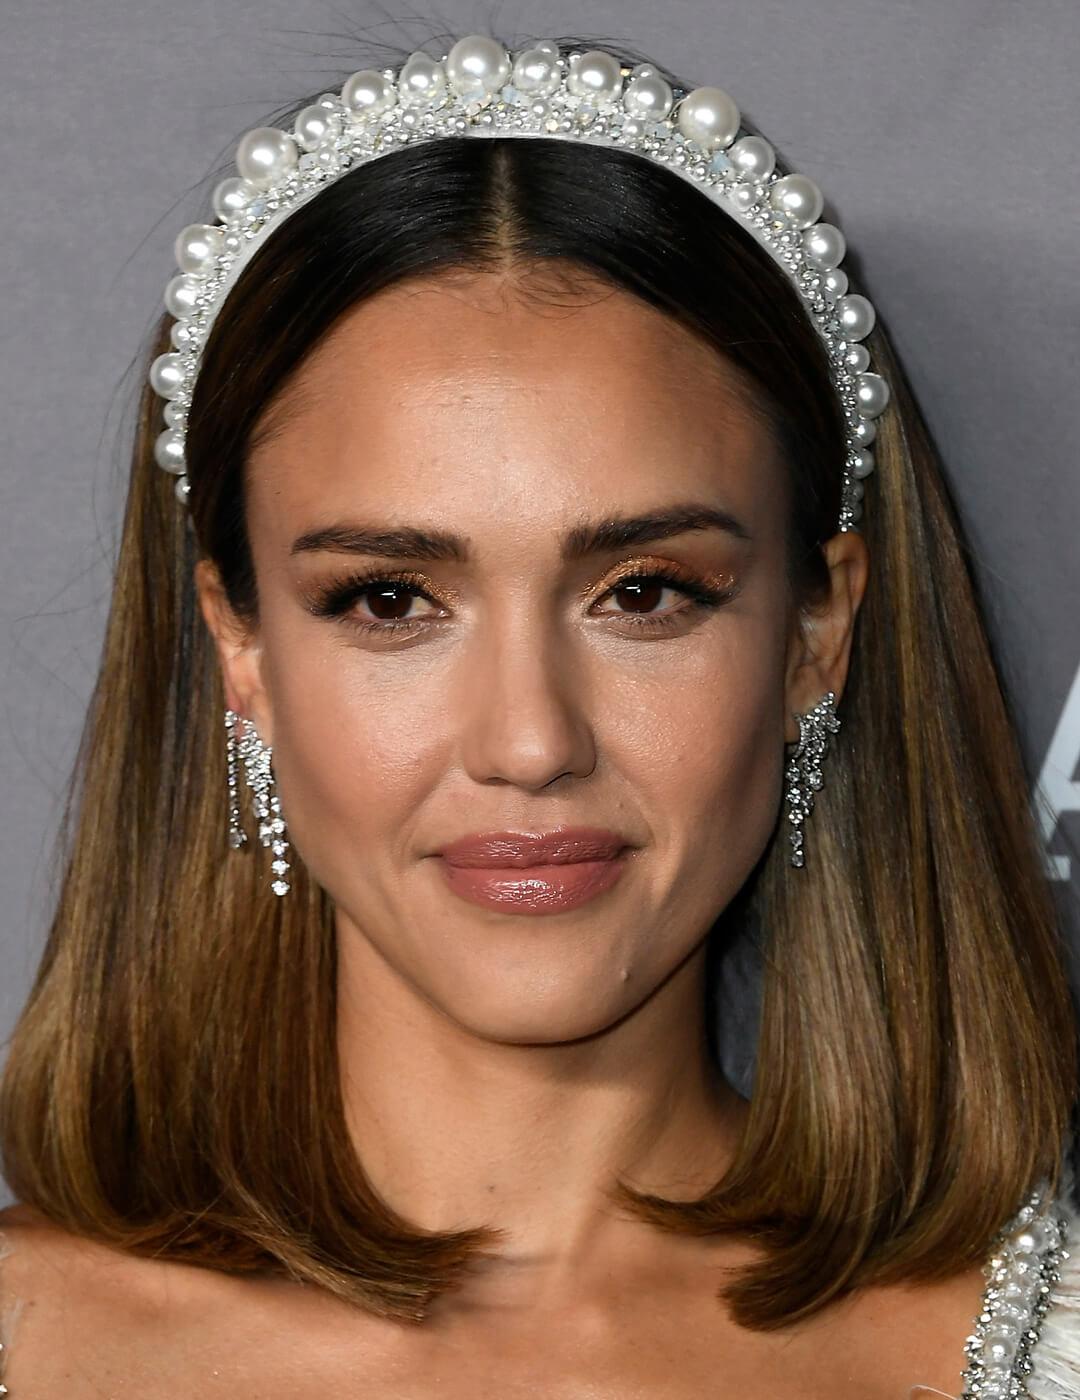 A photo of Jessica Alba showing her shoulder-length dark hair with white crystal headpiece 